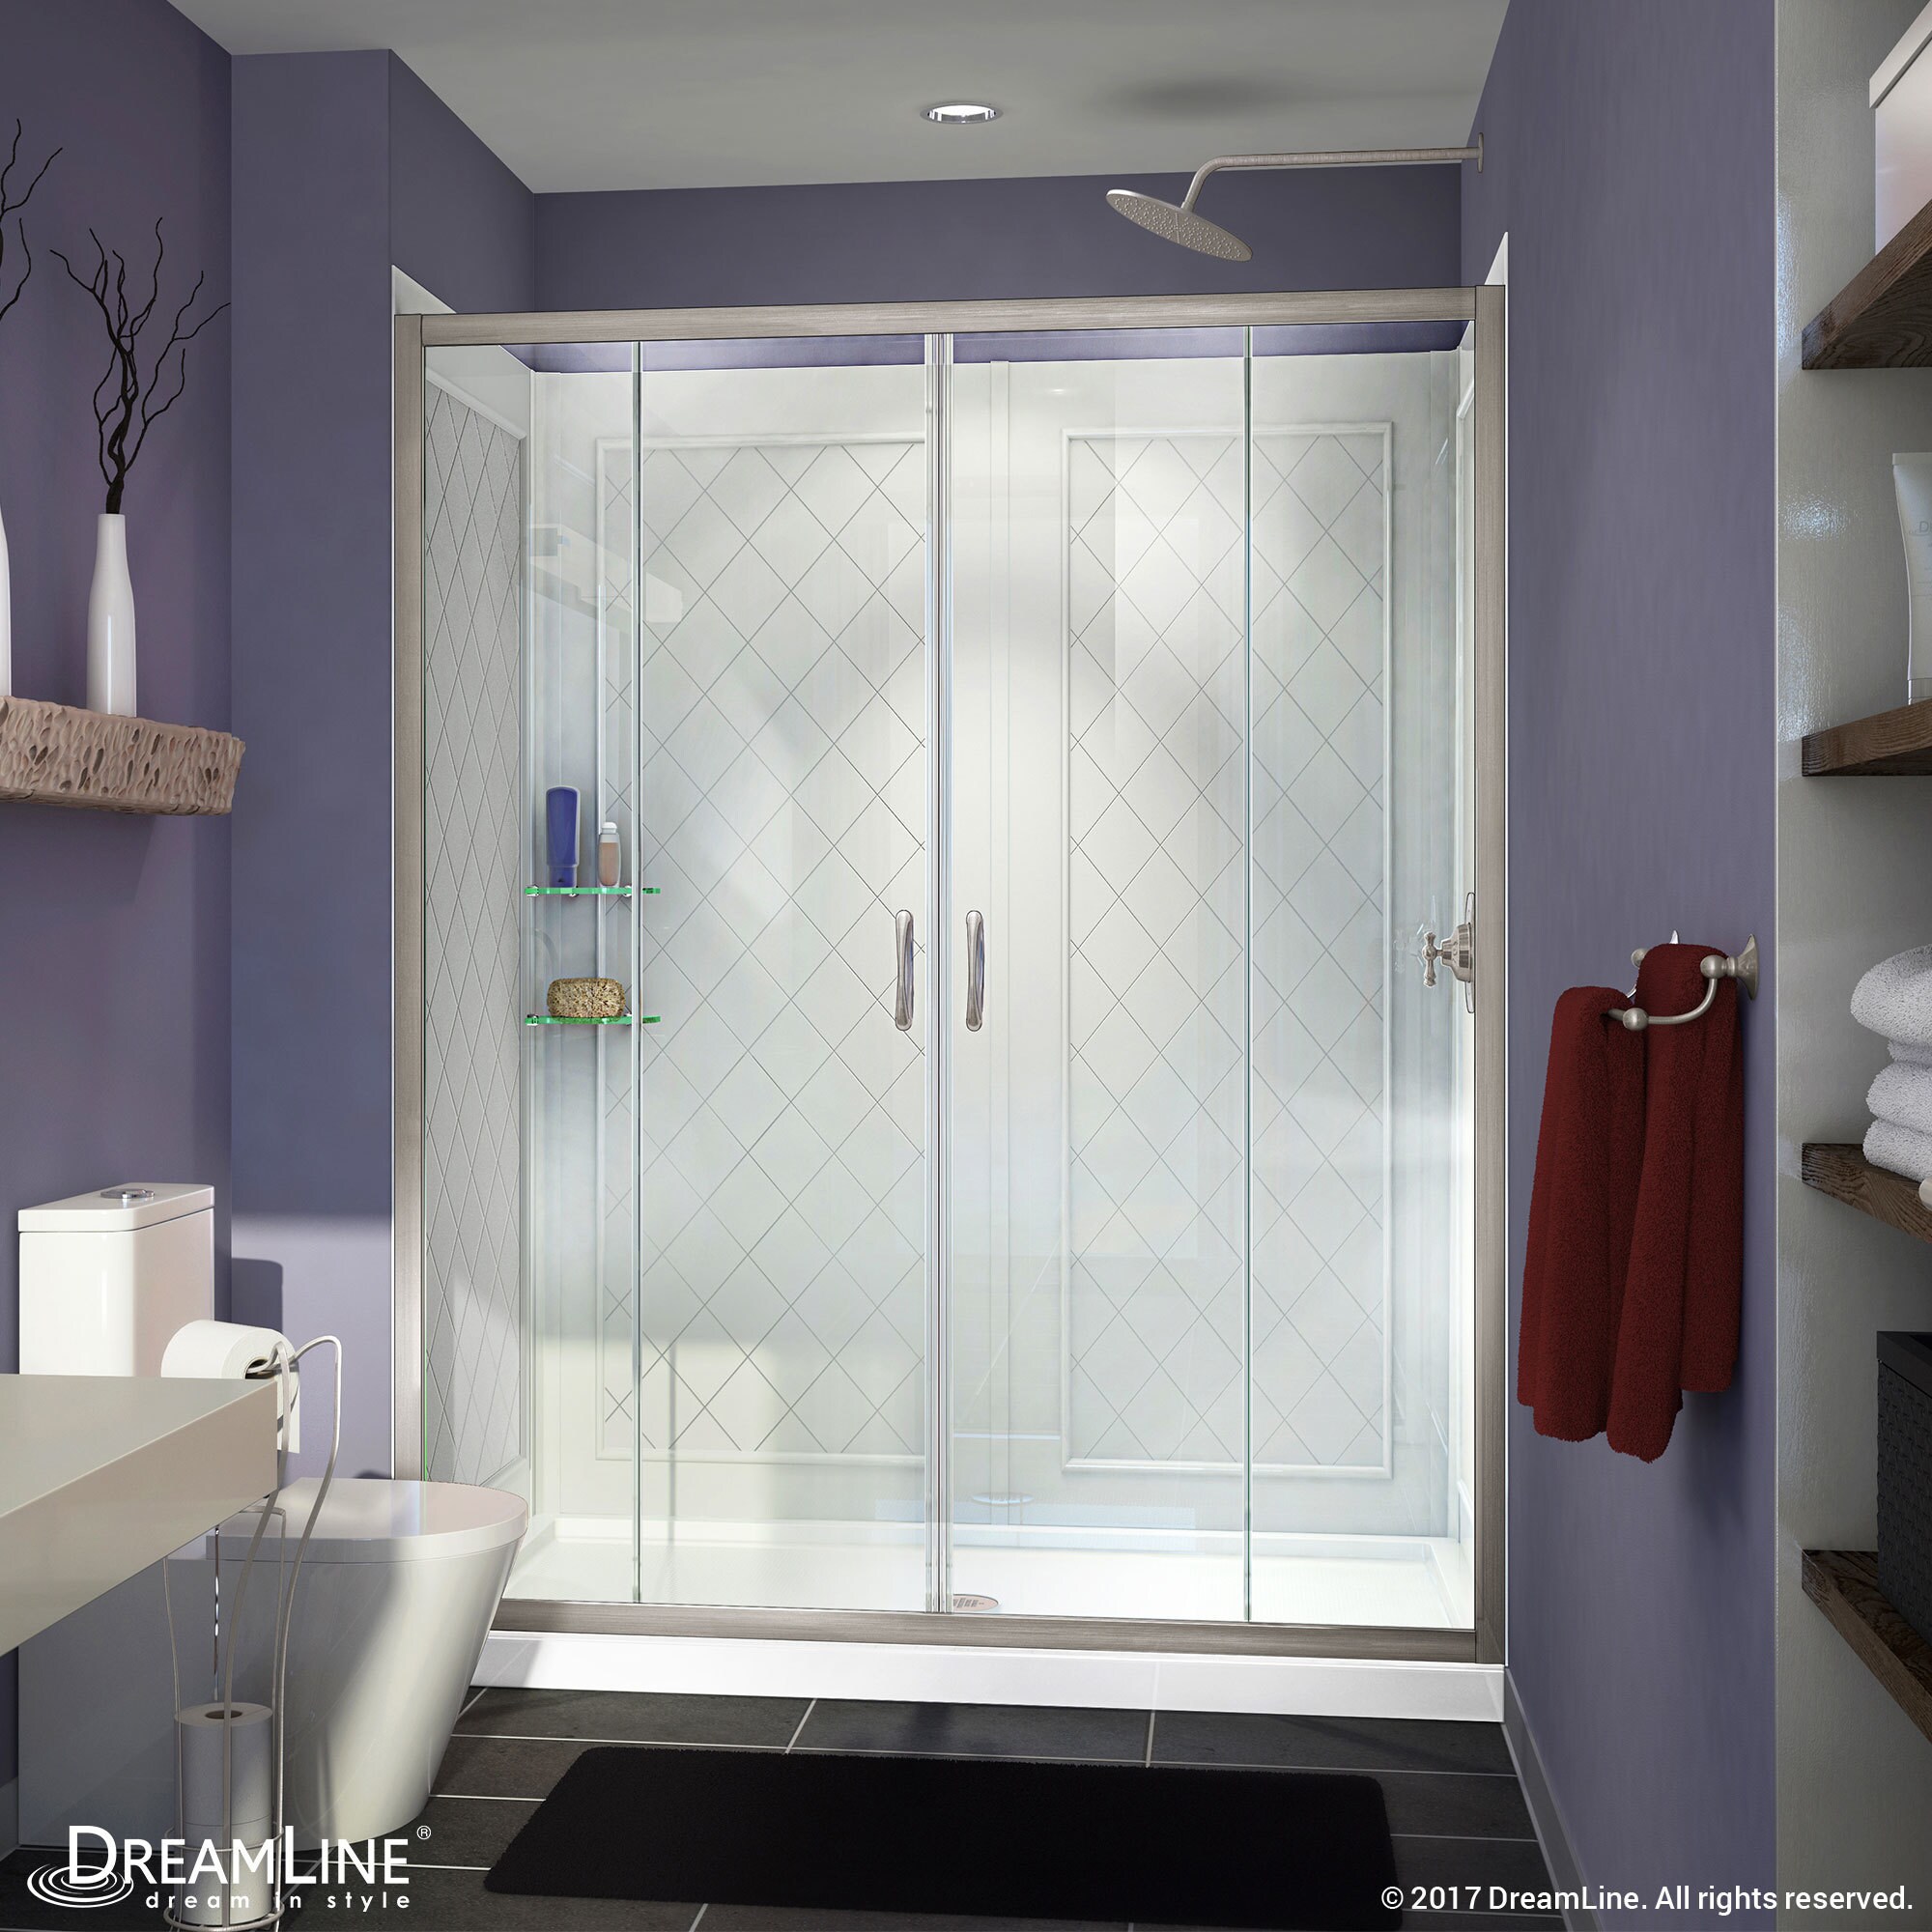 https://ak1.ostkcdn.com/images/products/8431246/DreamLine-Visions-32-in.-D-x-60-in.-W-x-76-3-4-in.-H-Sliding-Shower-Door-Shower-Base-and-QWALL-5-Backwall-Kit-2a24ba04-7bc3-4387-8a8d-95cc56b48759.jpg